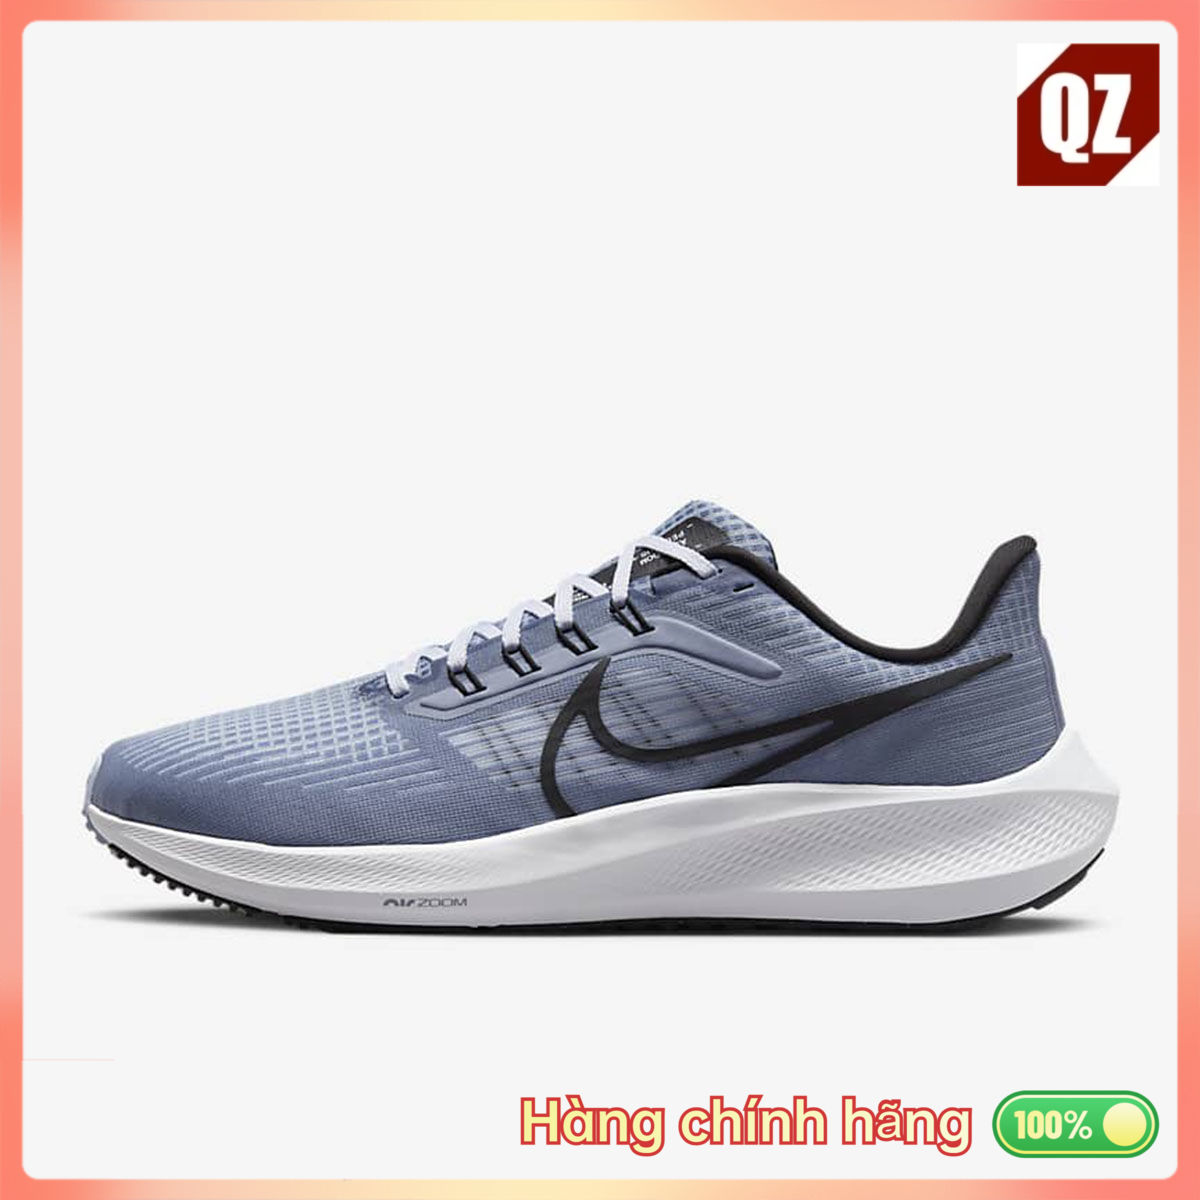 Nike ZOOM PEGASUS 39 Lightweight and Breathable Mens Running Shoes  DH4071-401 Giày thể thao Giày thể thao giày chạy bộ giày bóng rổ - MixASale